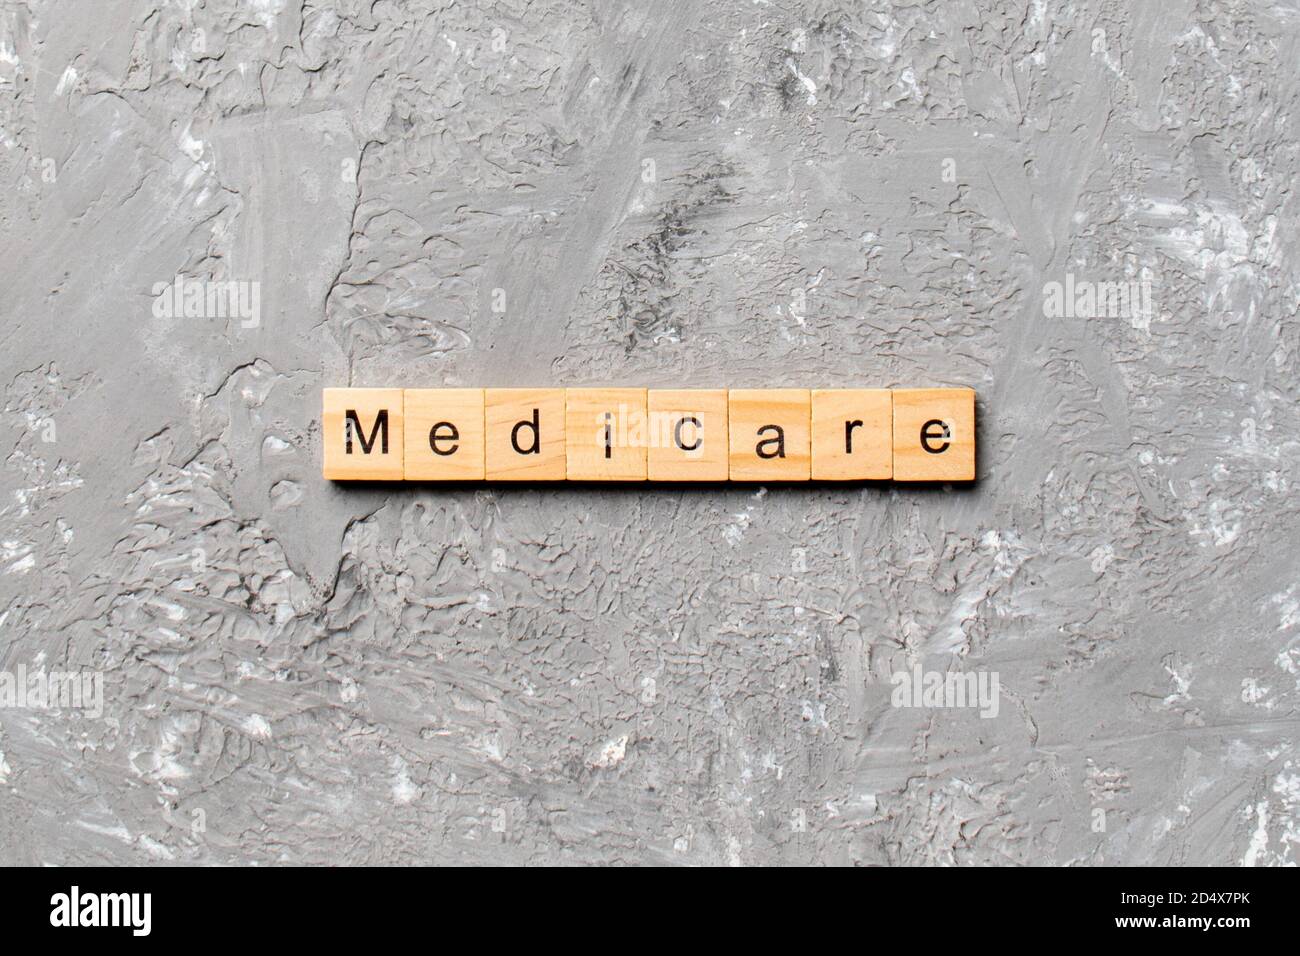 medicare word written on wood block. medicare text on table, concept. Stock Photo